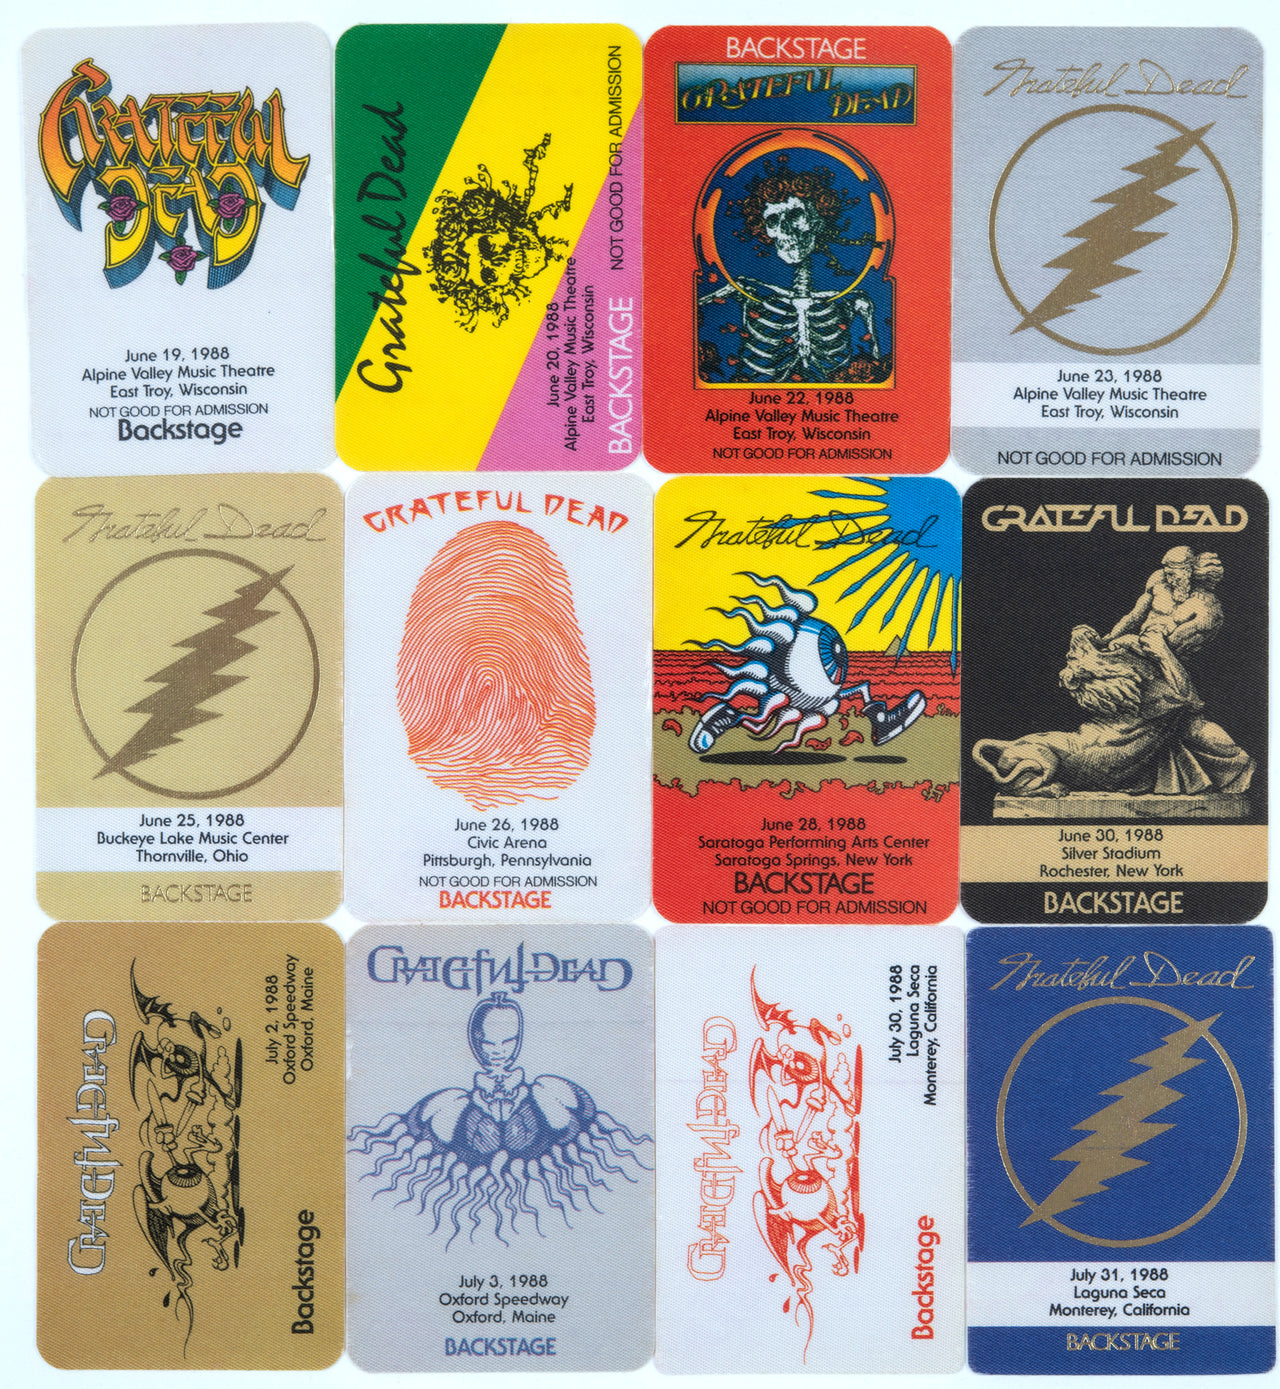 Grateful Dead Backstage Passes (6/19/1988 - 7/31/1988) from Dan Healy